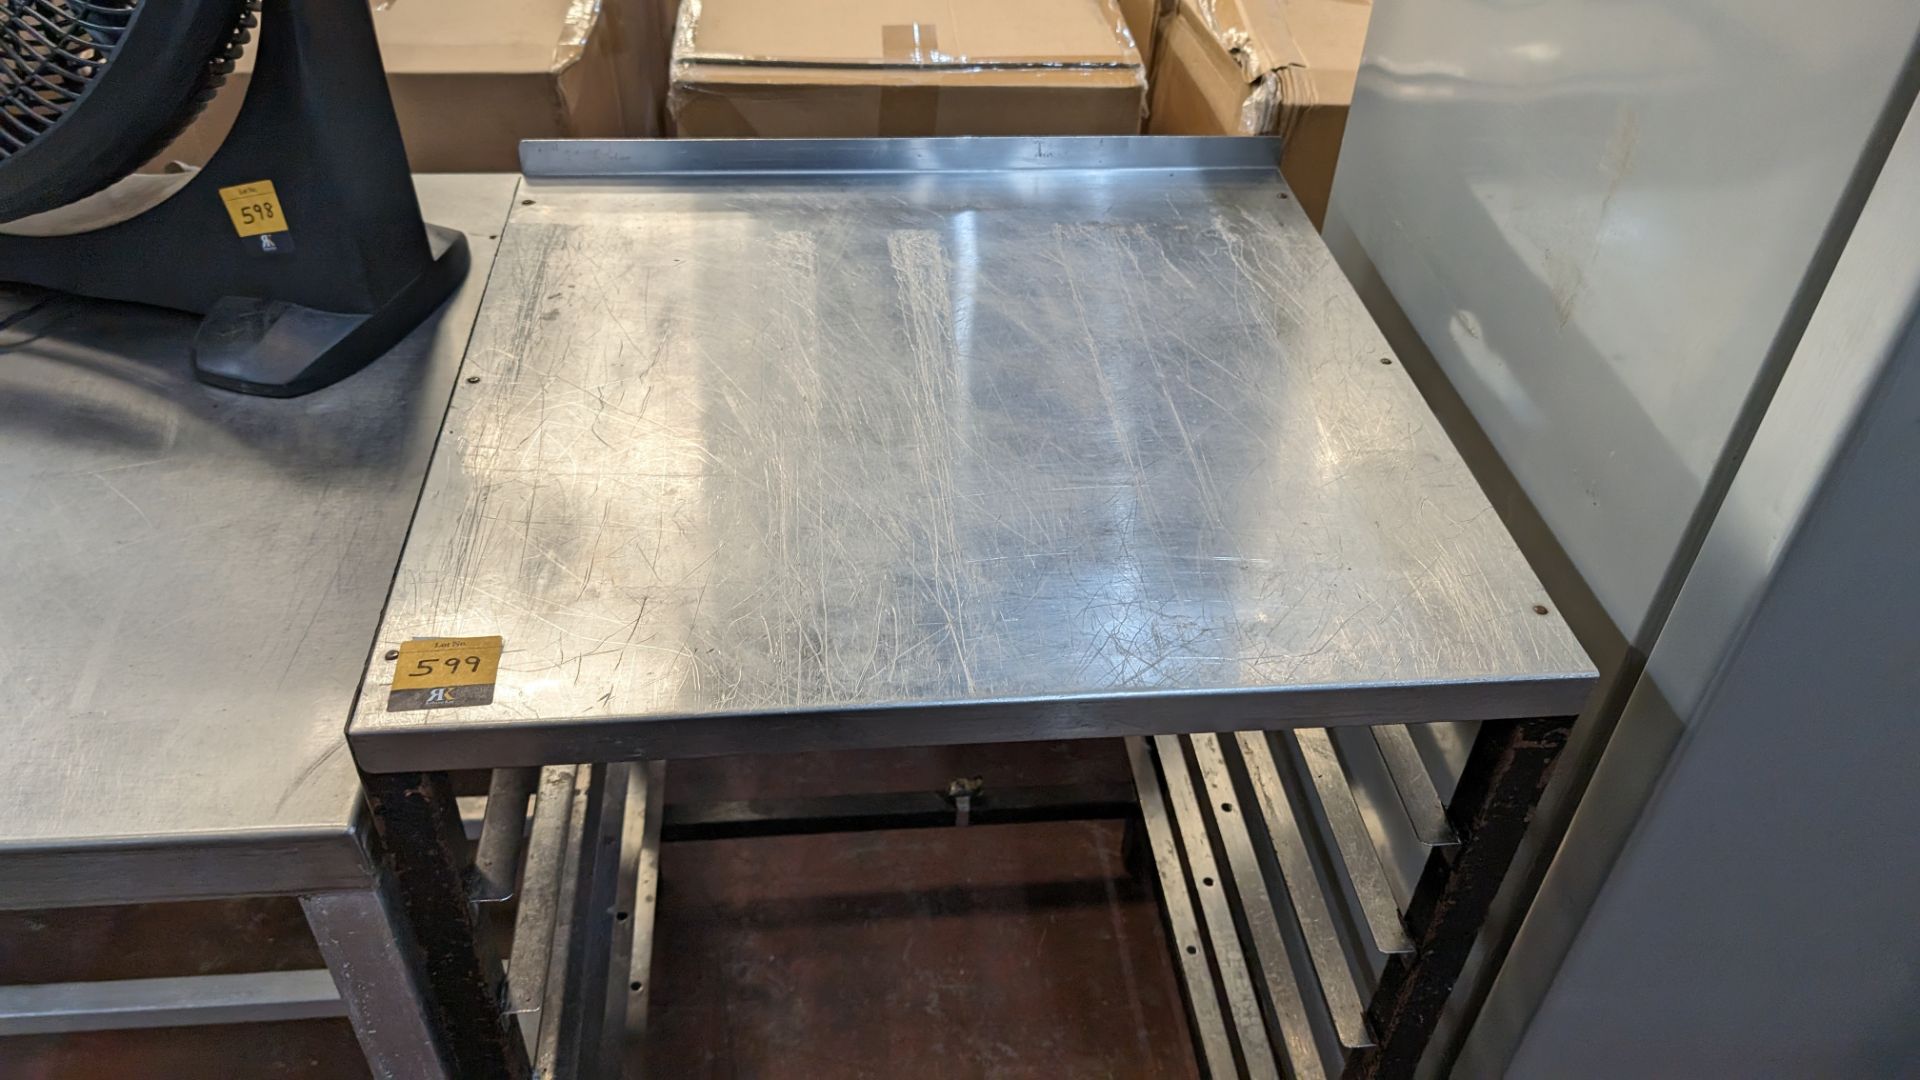 Stainless steel table with capacity for holding trays below, assumed to be for use for commercial di - Image 3 of 4